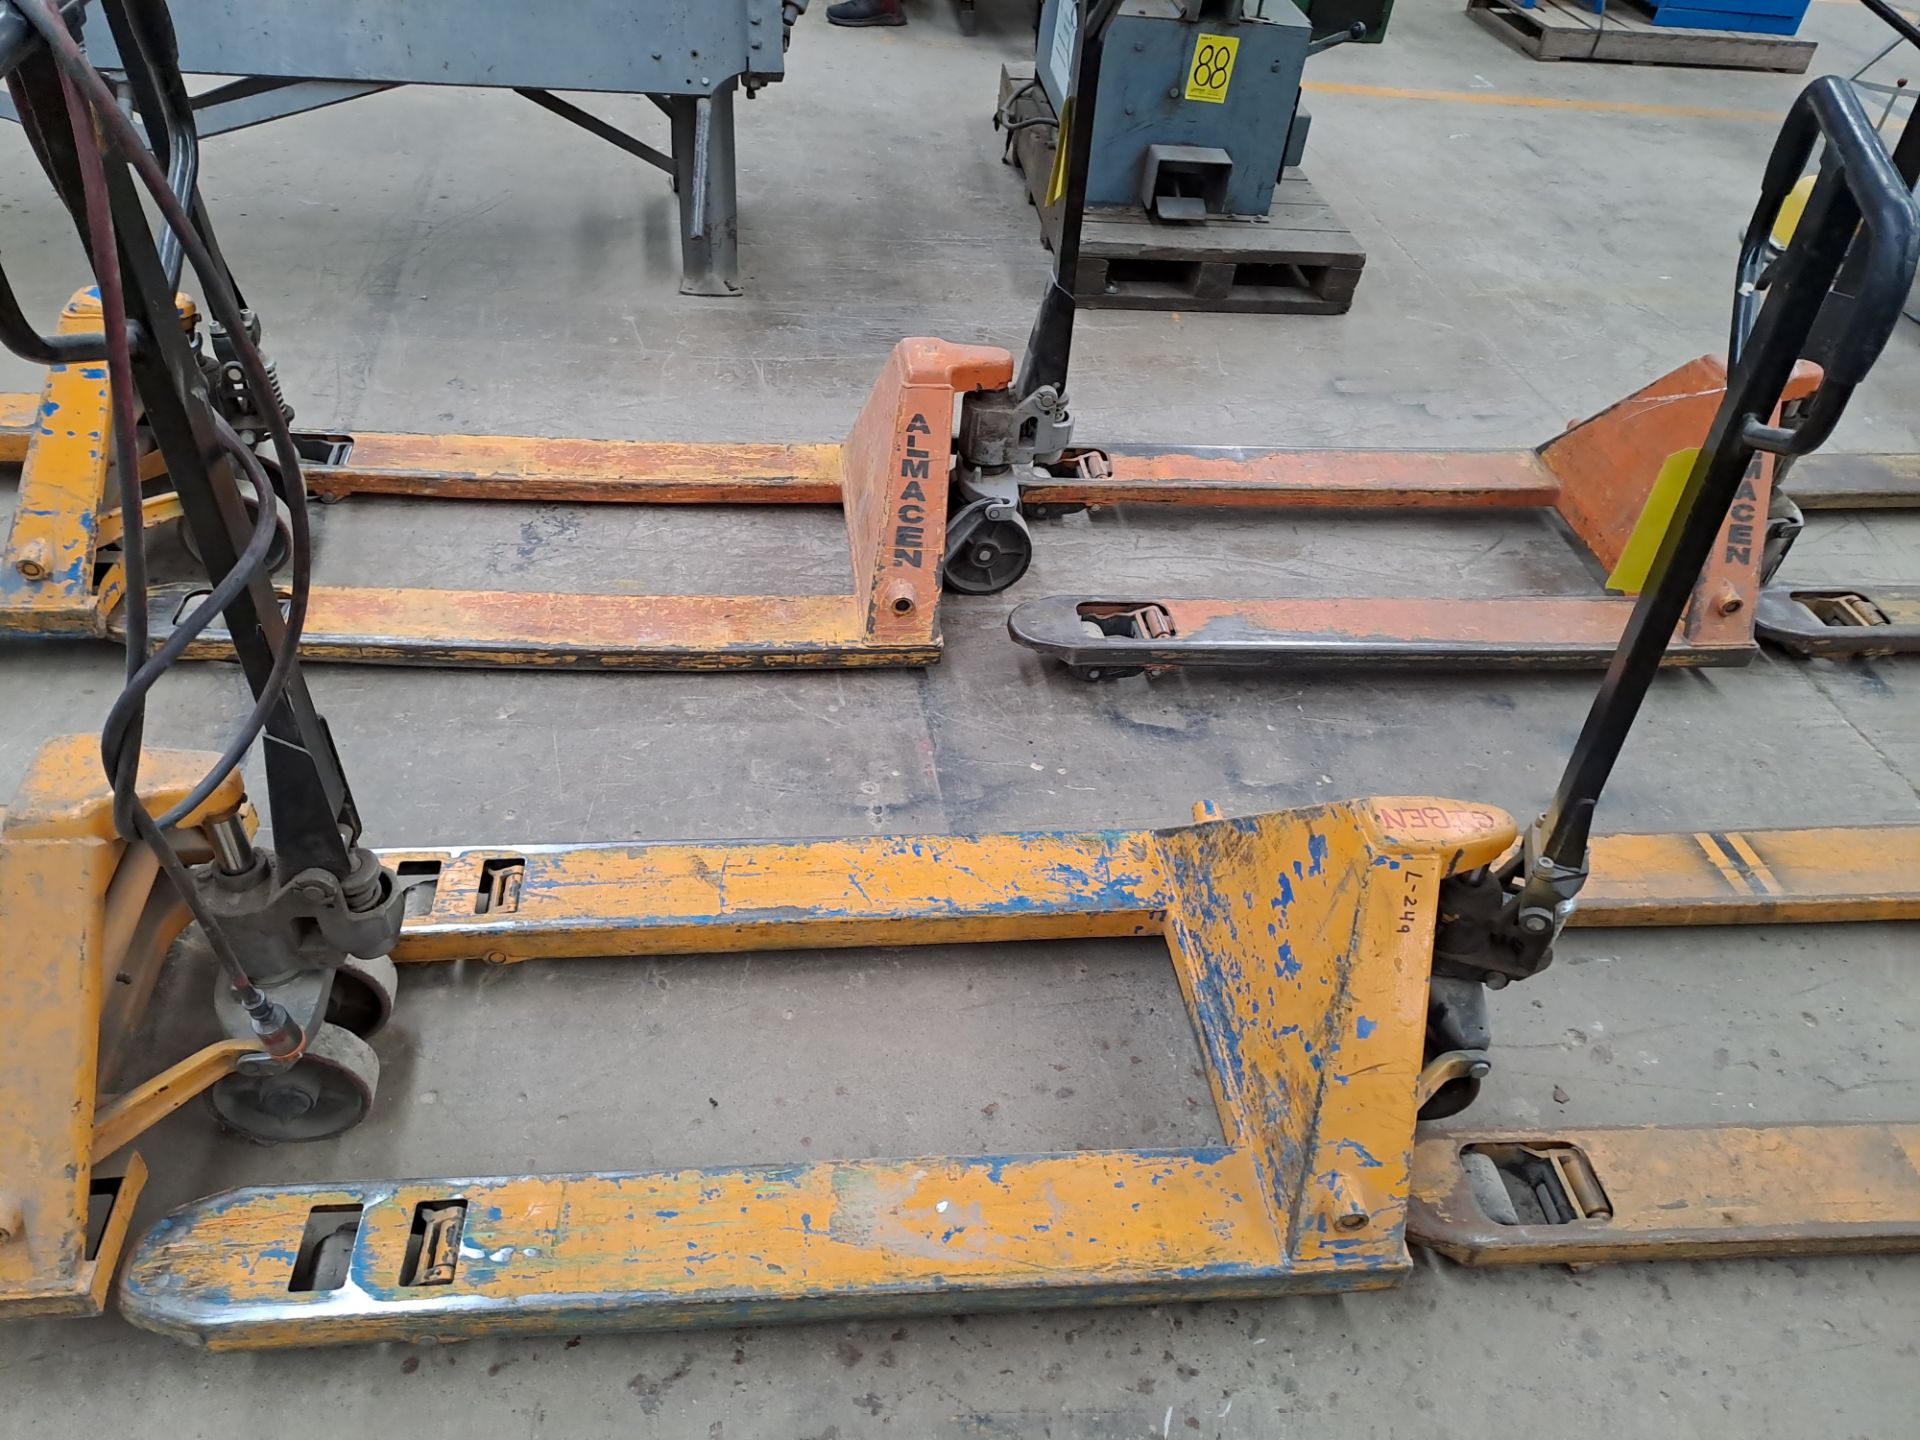 2 Hydraulic pallet truck with a maximum capacity of 5500 lbs. / 2 Traspaleta hidraulica con capacid - Image 3 of 5